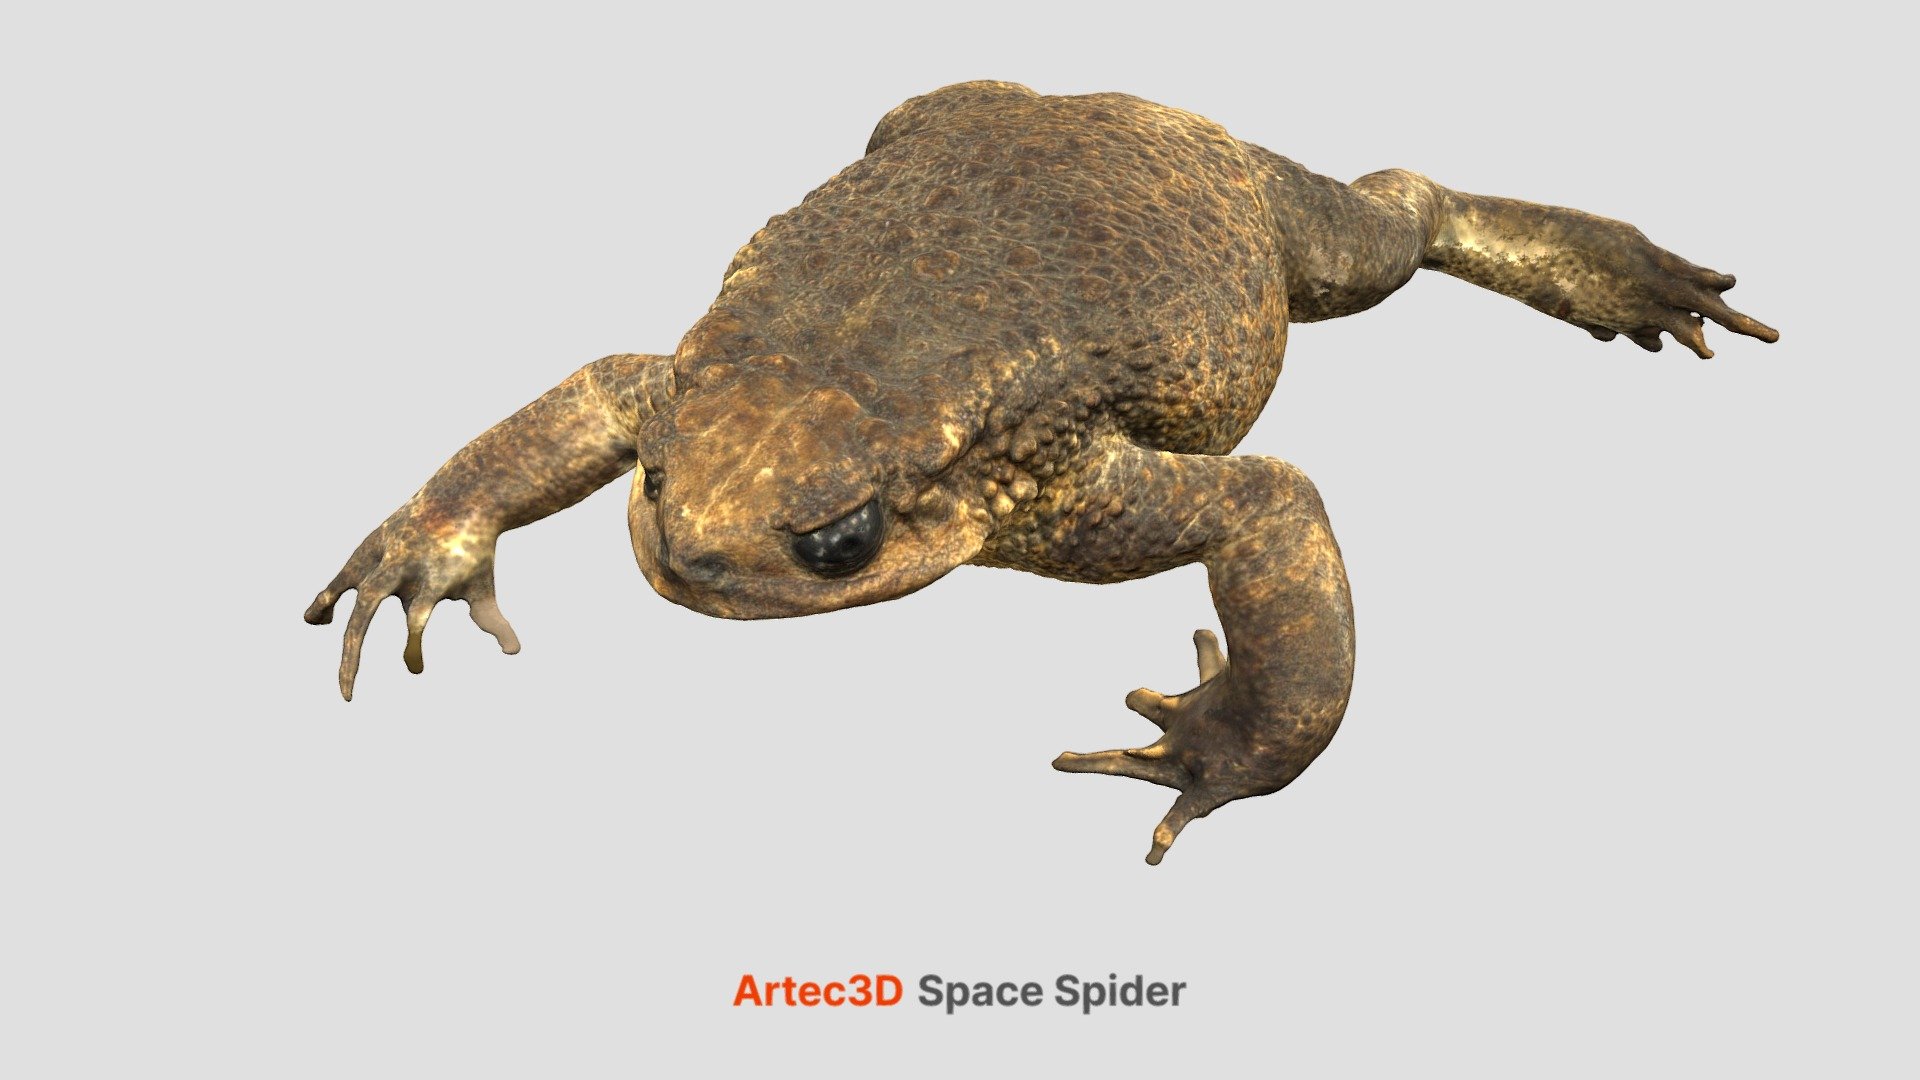 The intricate geometry of the frog’s skin was captured by Artec Spider https://www.artec3d.com/portable-3d-scanners/artec-spider in just 6 minutes! The model was scanned in two passes, and it was important to point the scanner at different angles in order to capture the surfaces between the toes.
You can download this model at https://www.threeding.com/3d-printing-models/large-female-cane-toad 3d model